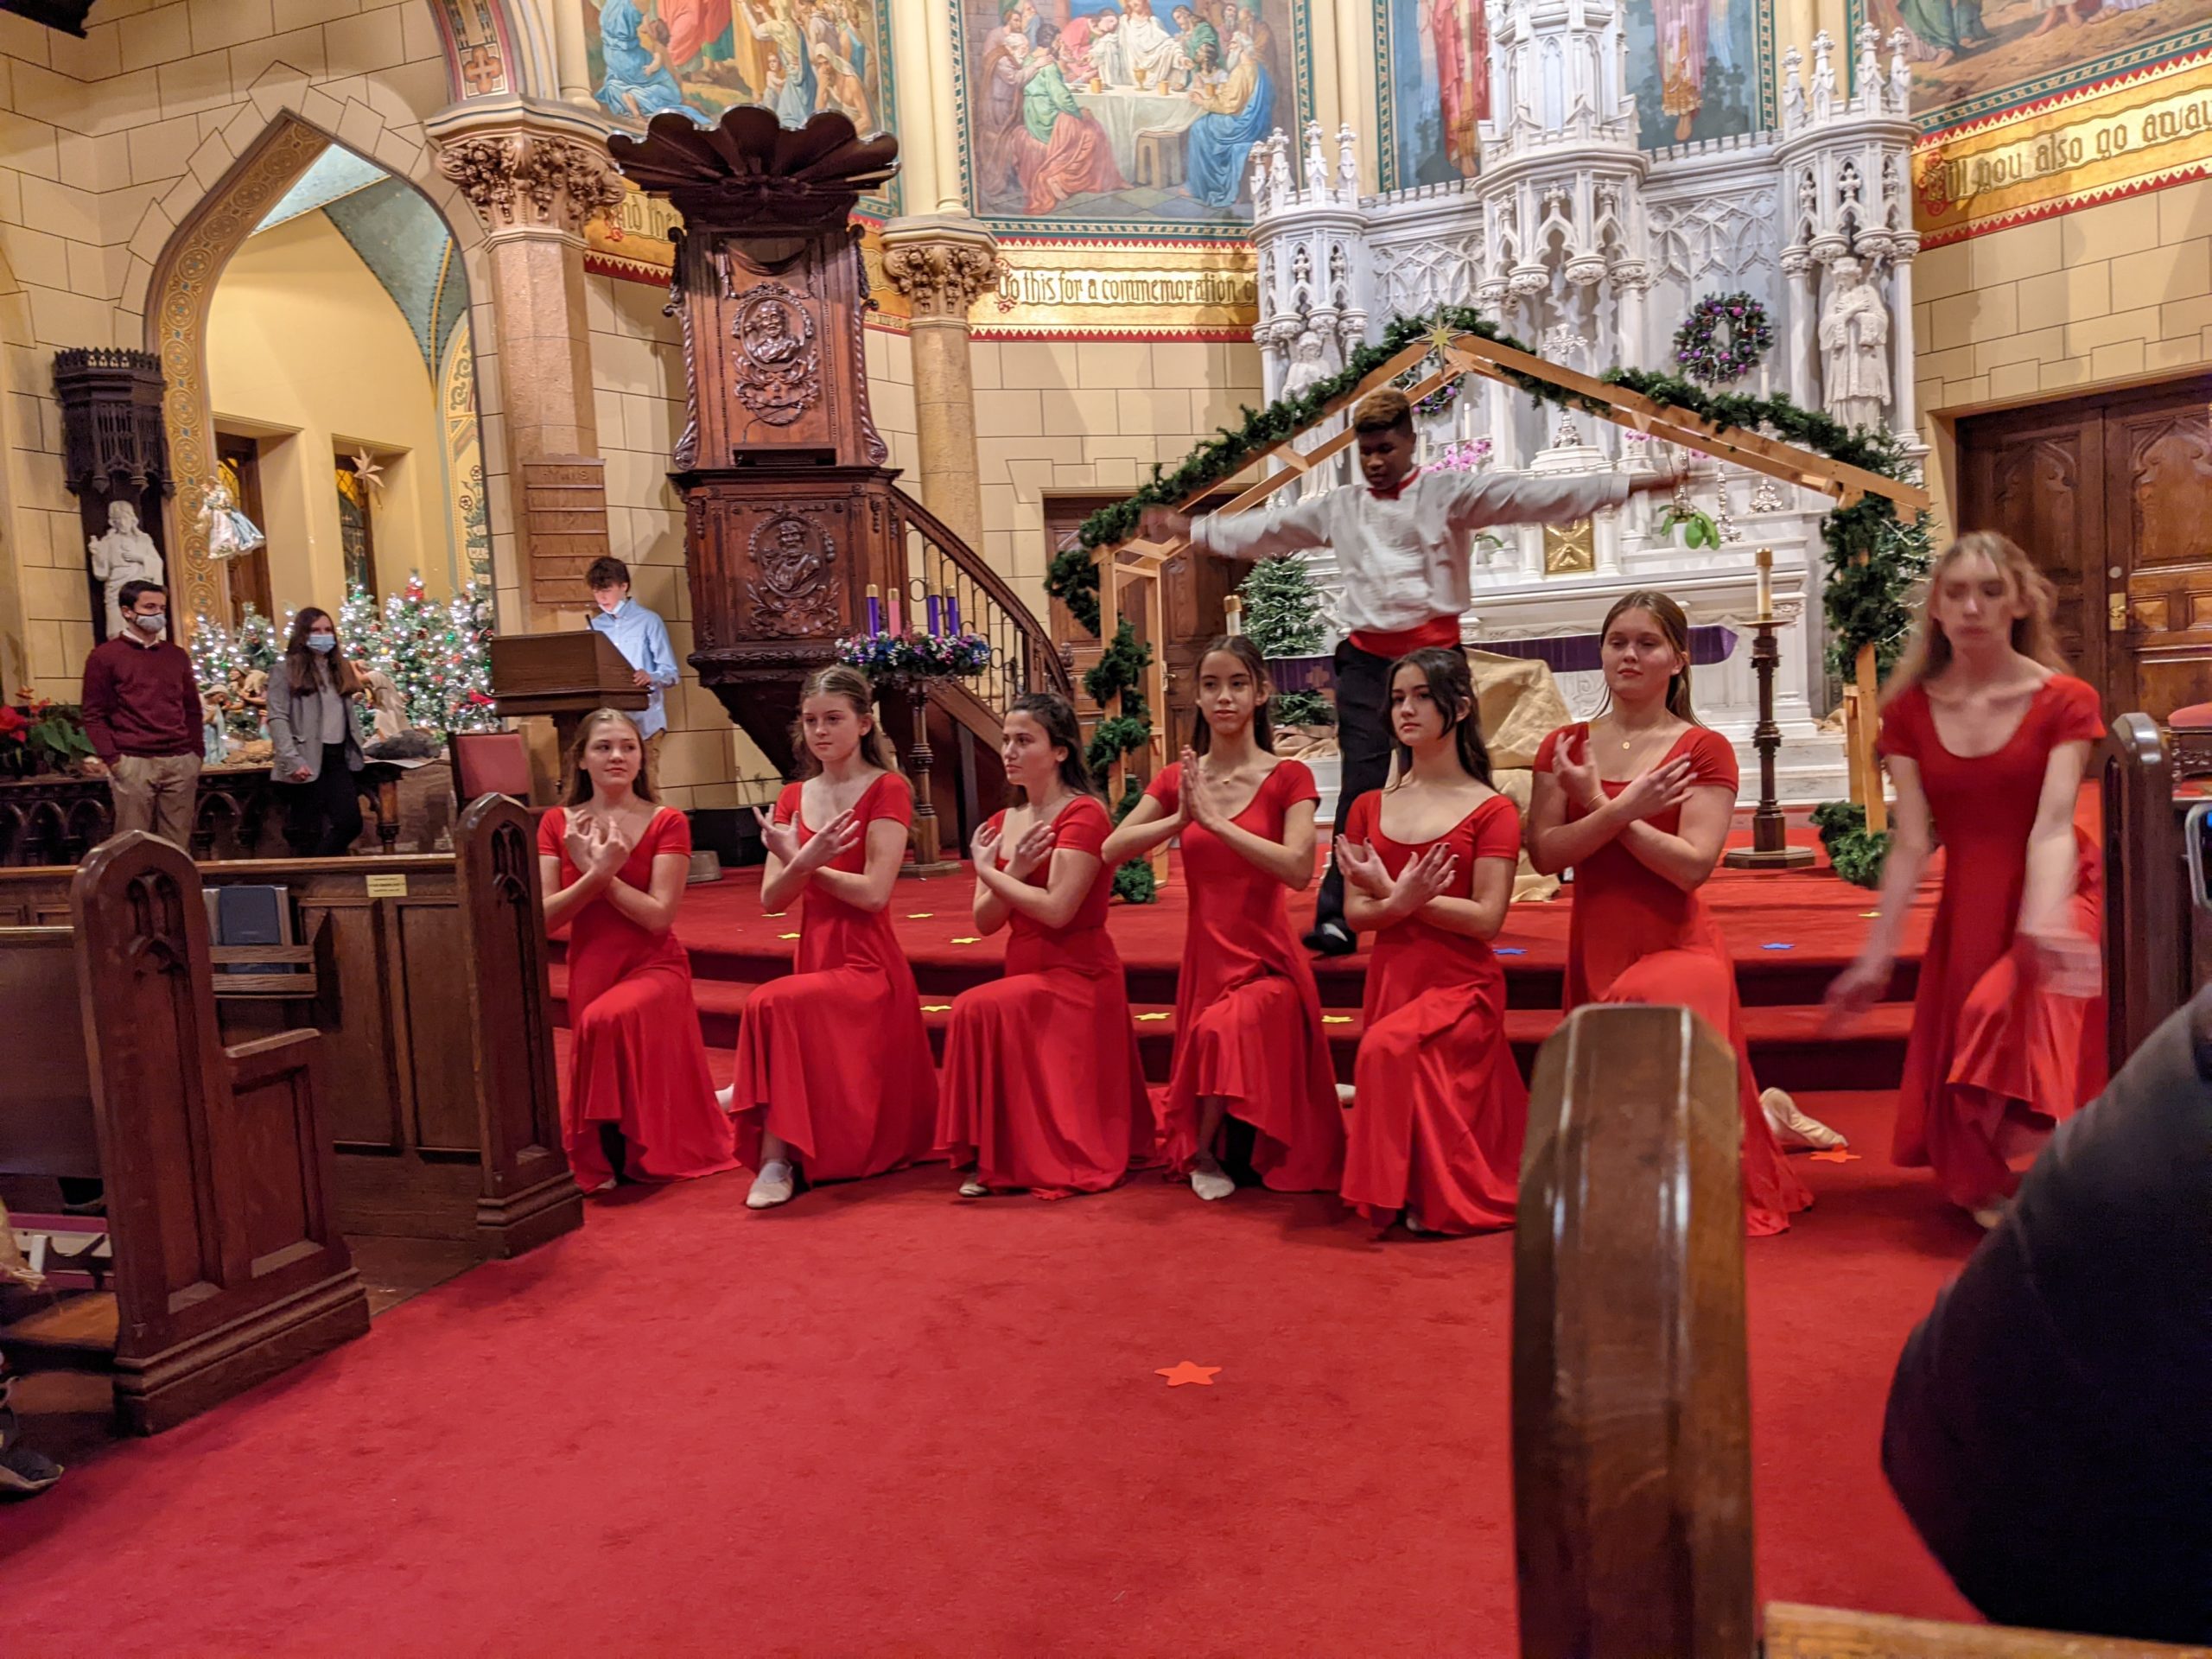 Members of the Dance Company of Our Lady of the Hamptons School performed for the parish family of the Basilica of the Sacred Hearts of Jesus and Mary at the annual Christmas pageant. The group then prepared to join the school community for the school show, “On-Time Delivery.”